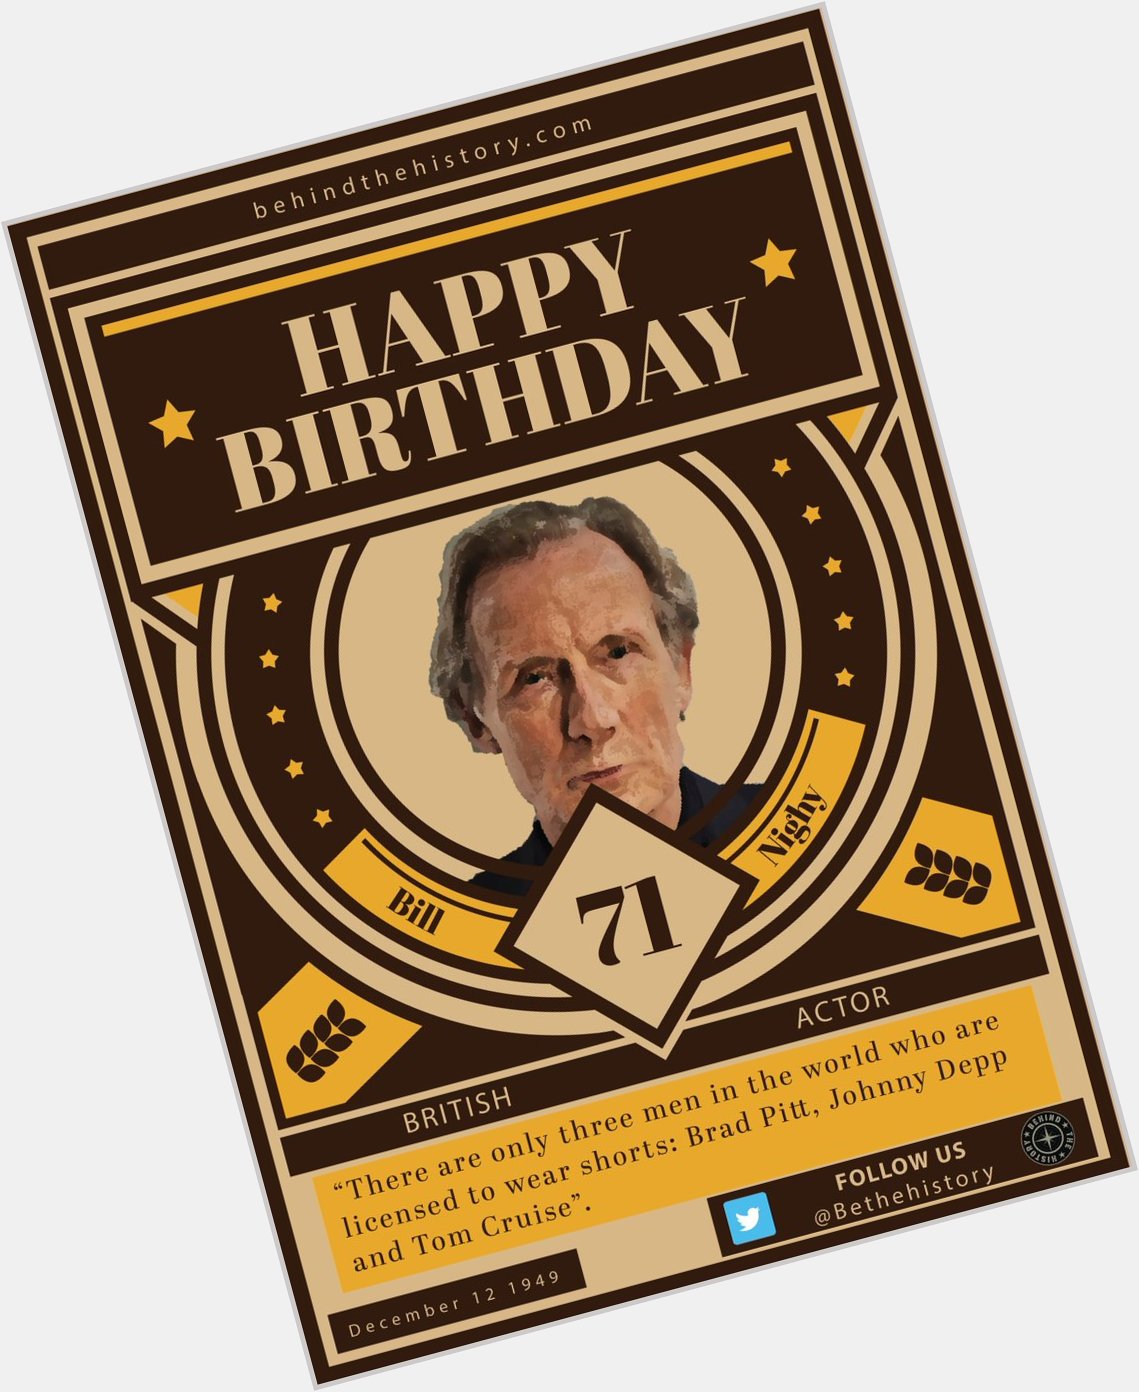 HAPPY BIRTHDAY Bill Nighy who is 71 today!    